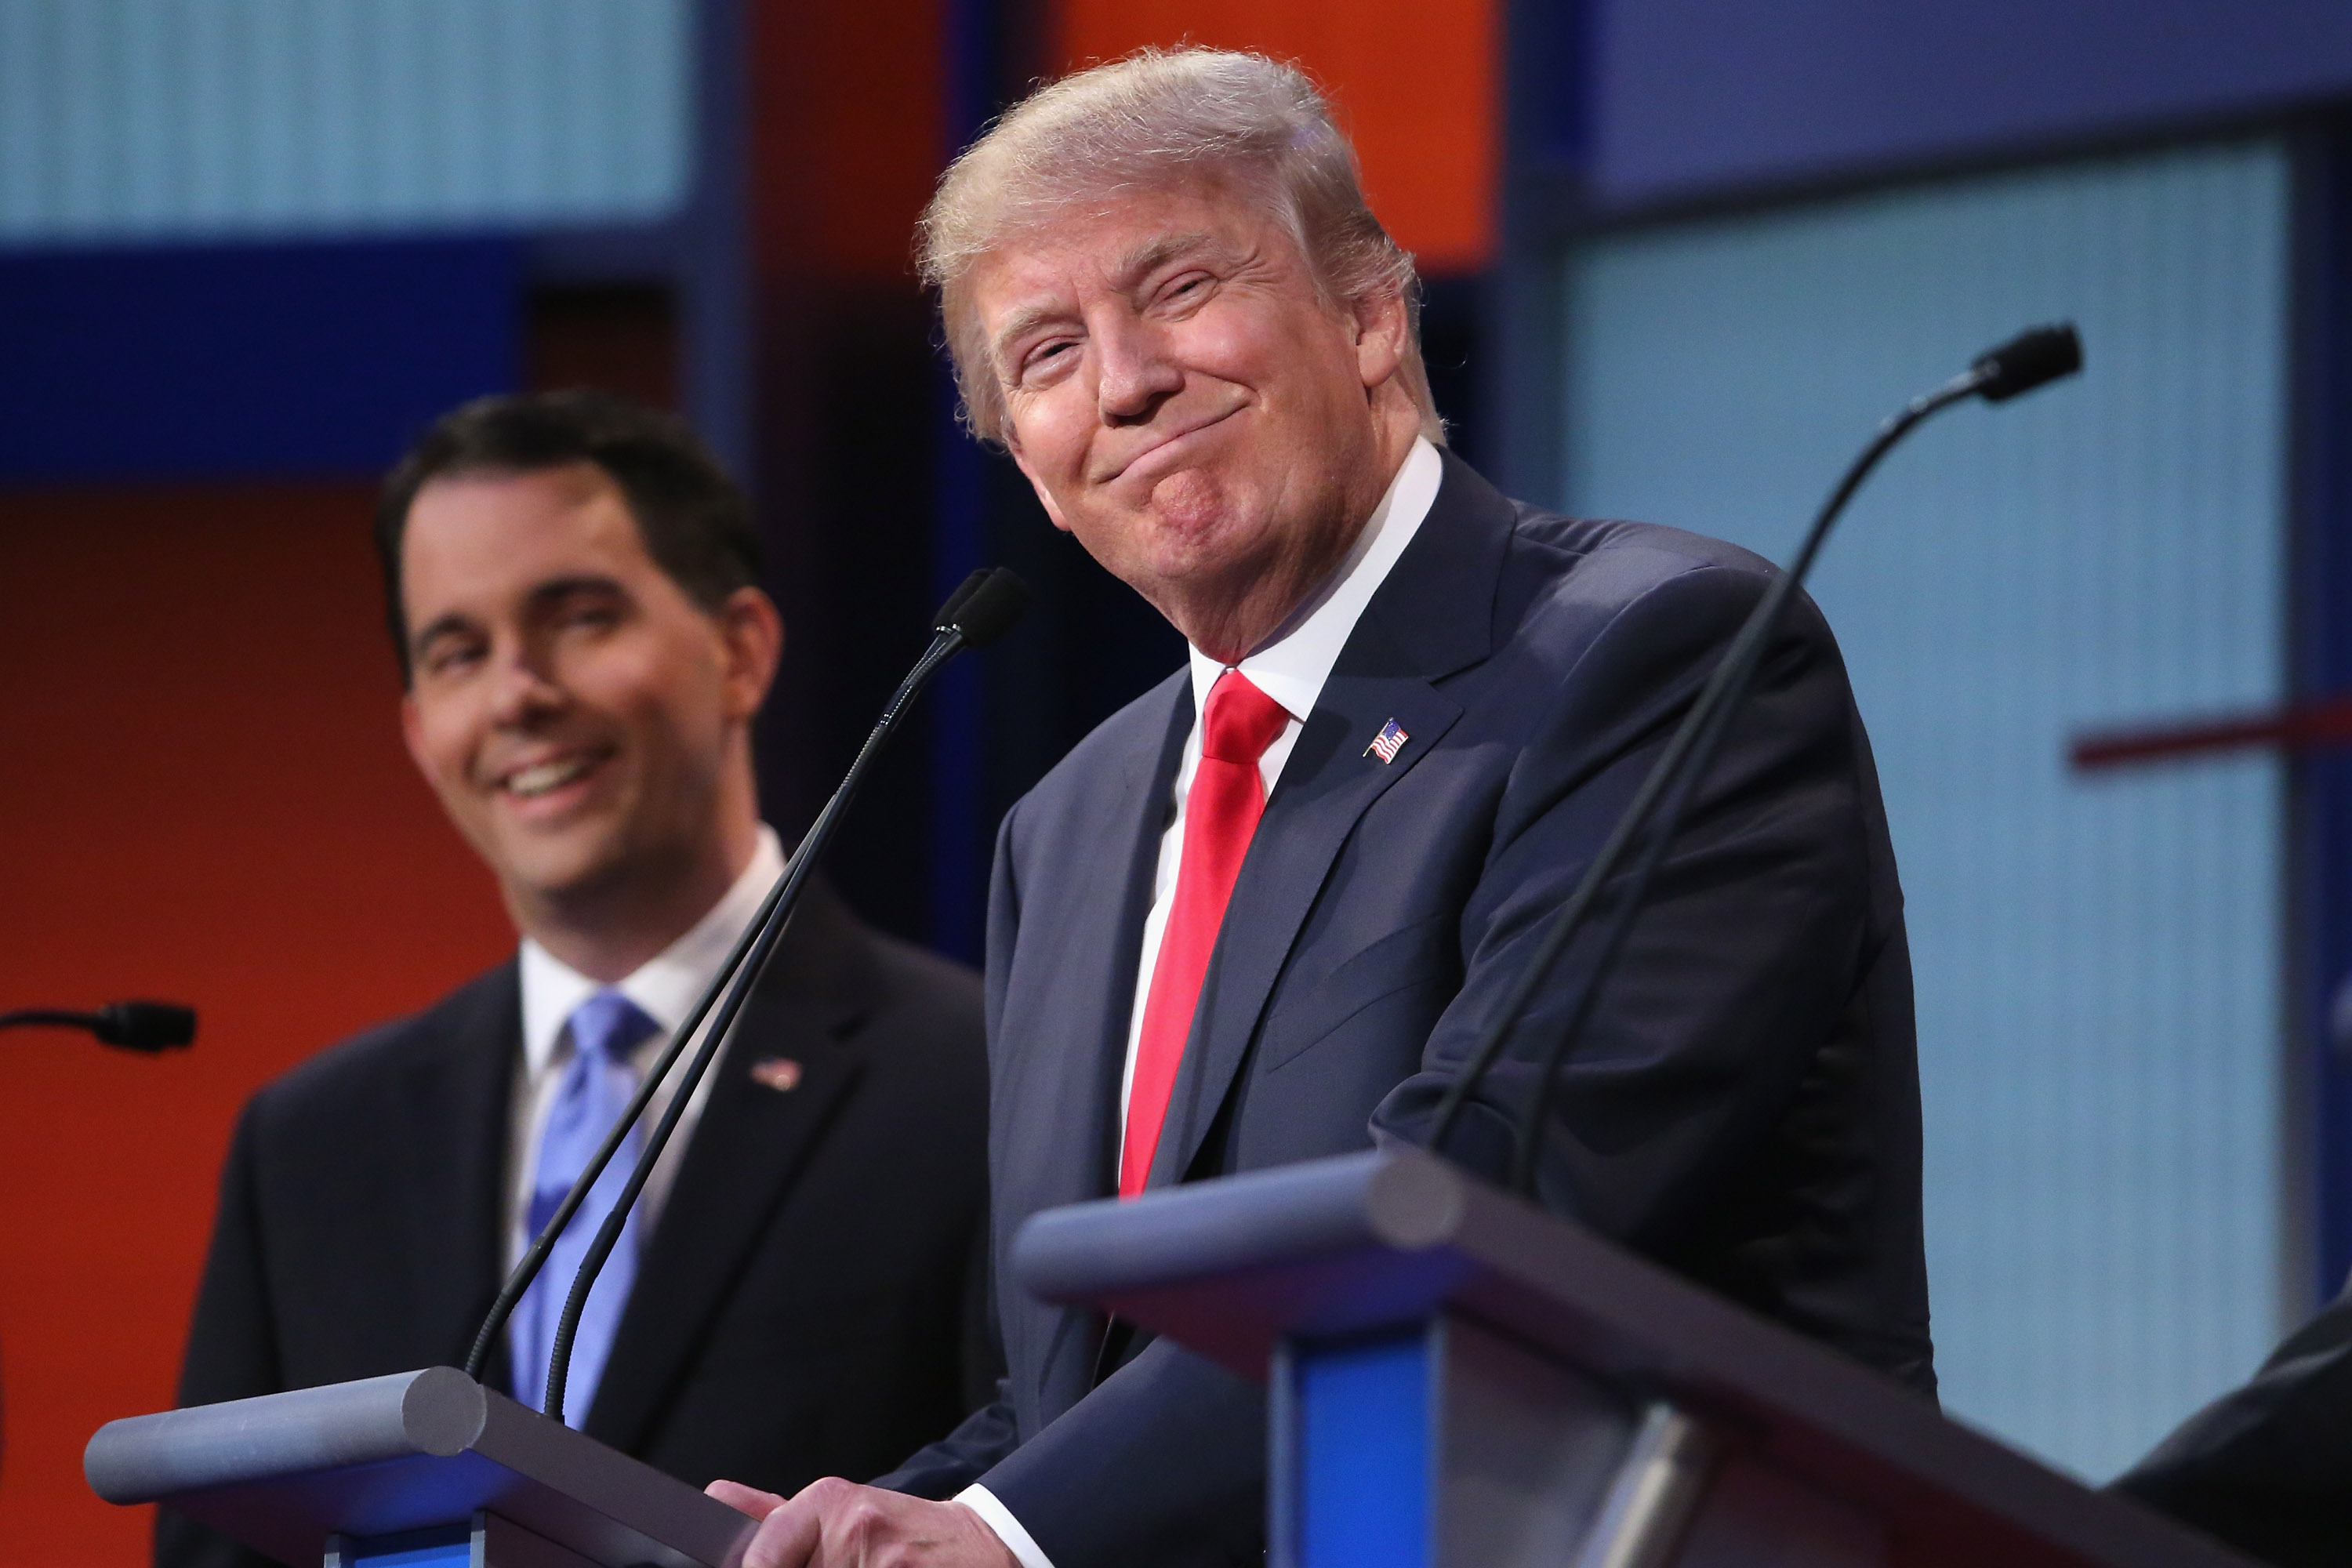 Republican presidential candidates Donald Trump (R) and Wisconsin Gov. Scott Walker participate in the first prime-time presidential debate hosted by FOX News and Facebook at the Quicken Loans Arena August 6, 2015 in Cleveland, Ohio. (Chip Somodevilla—Getty Images)